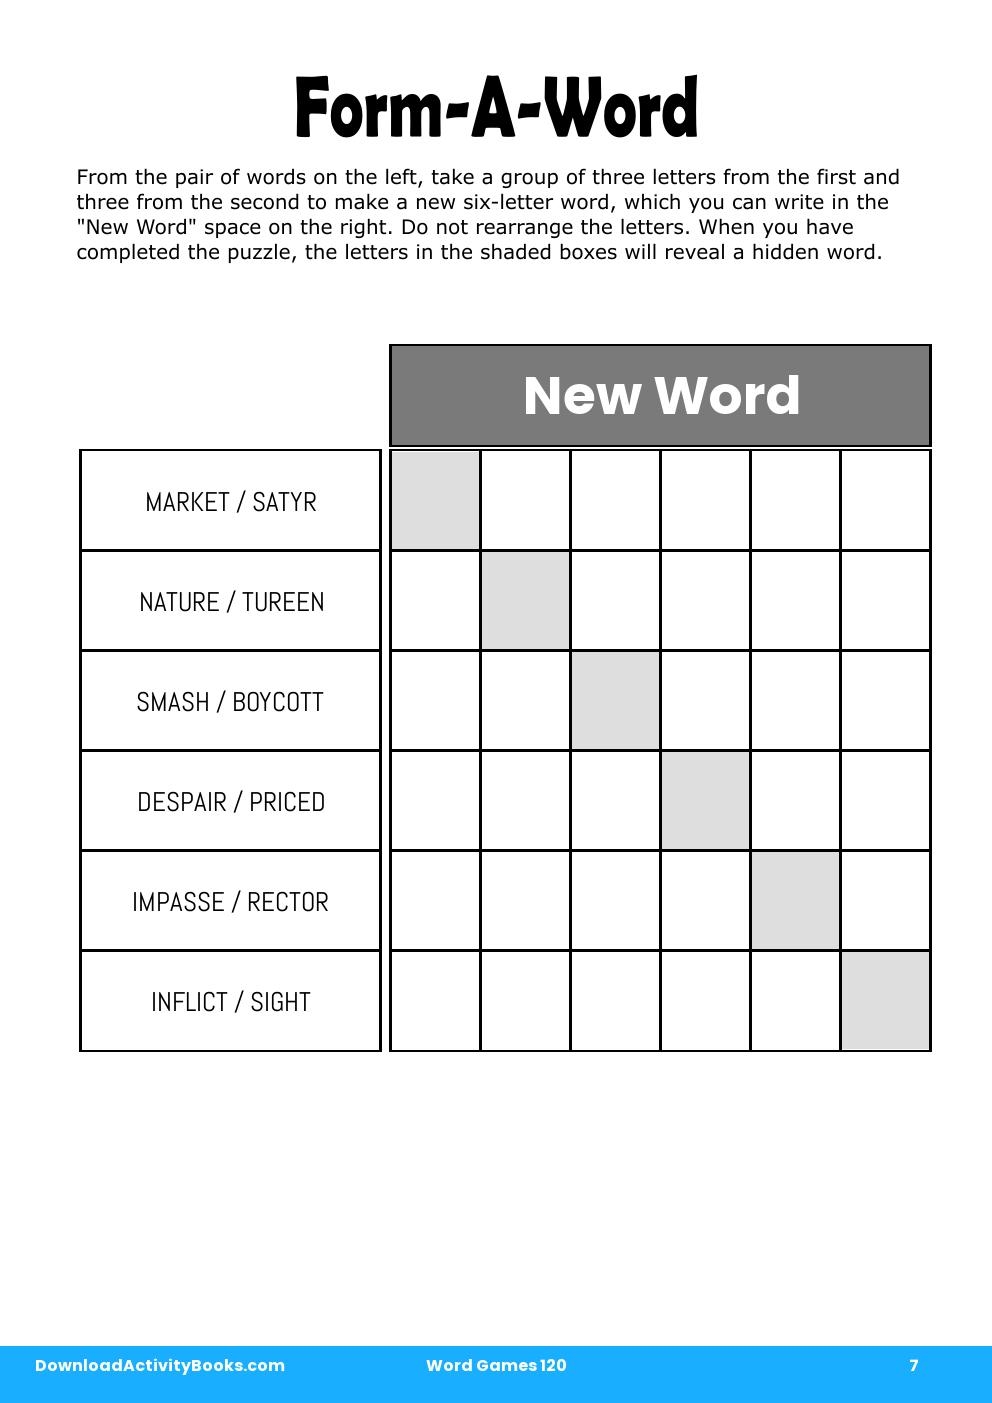 Form-A-Word in Word Games 120